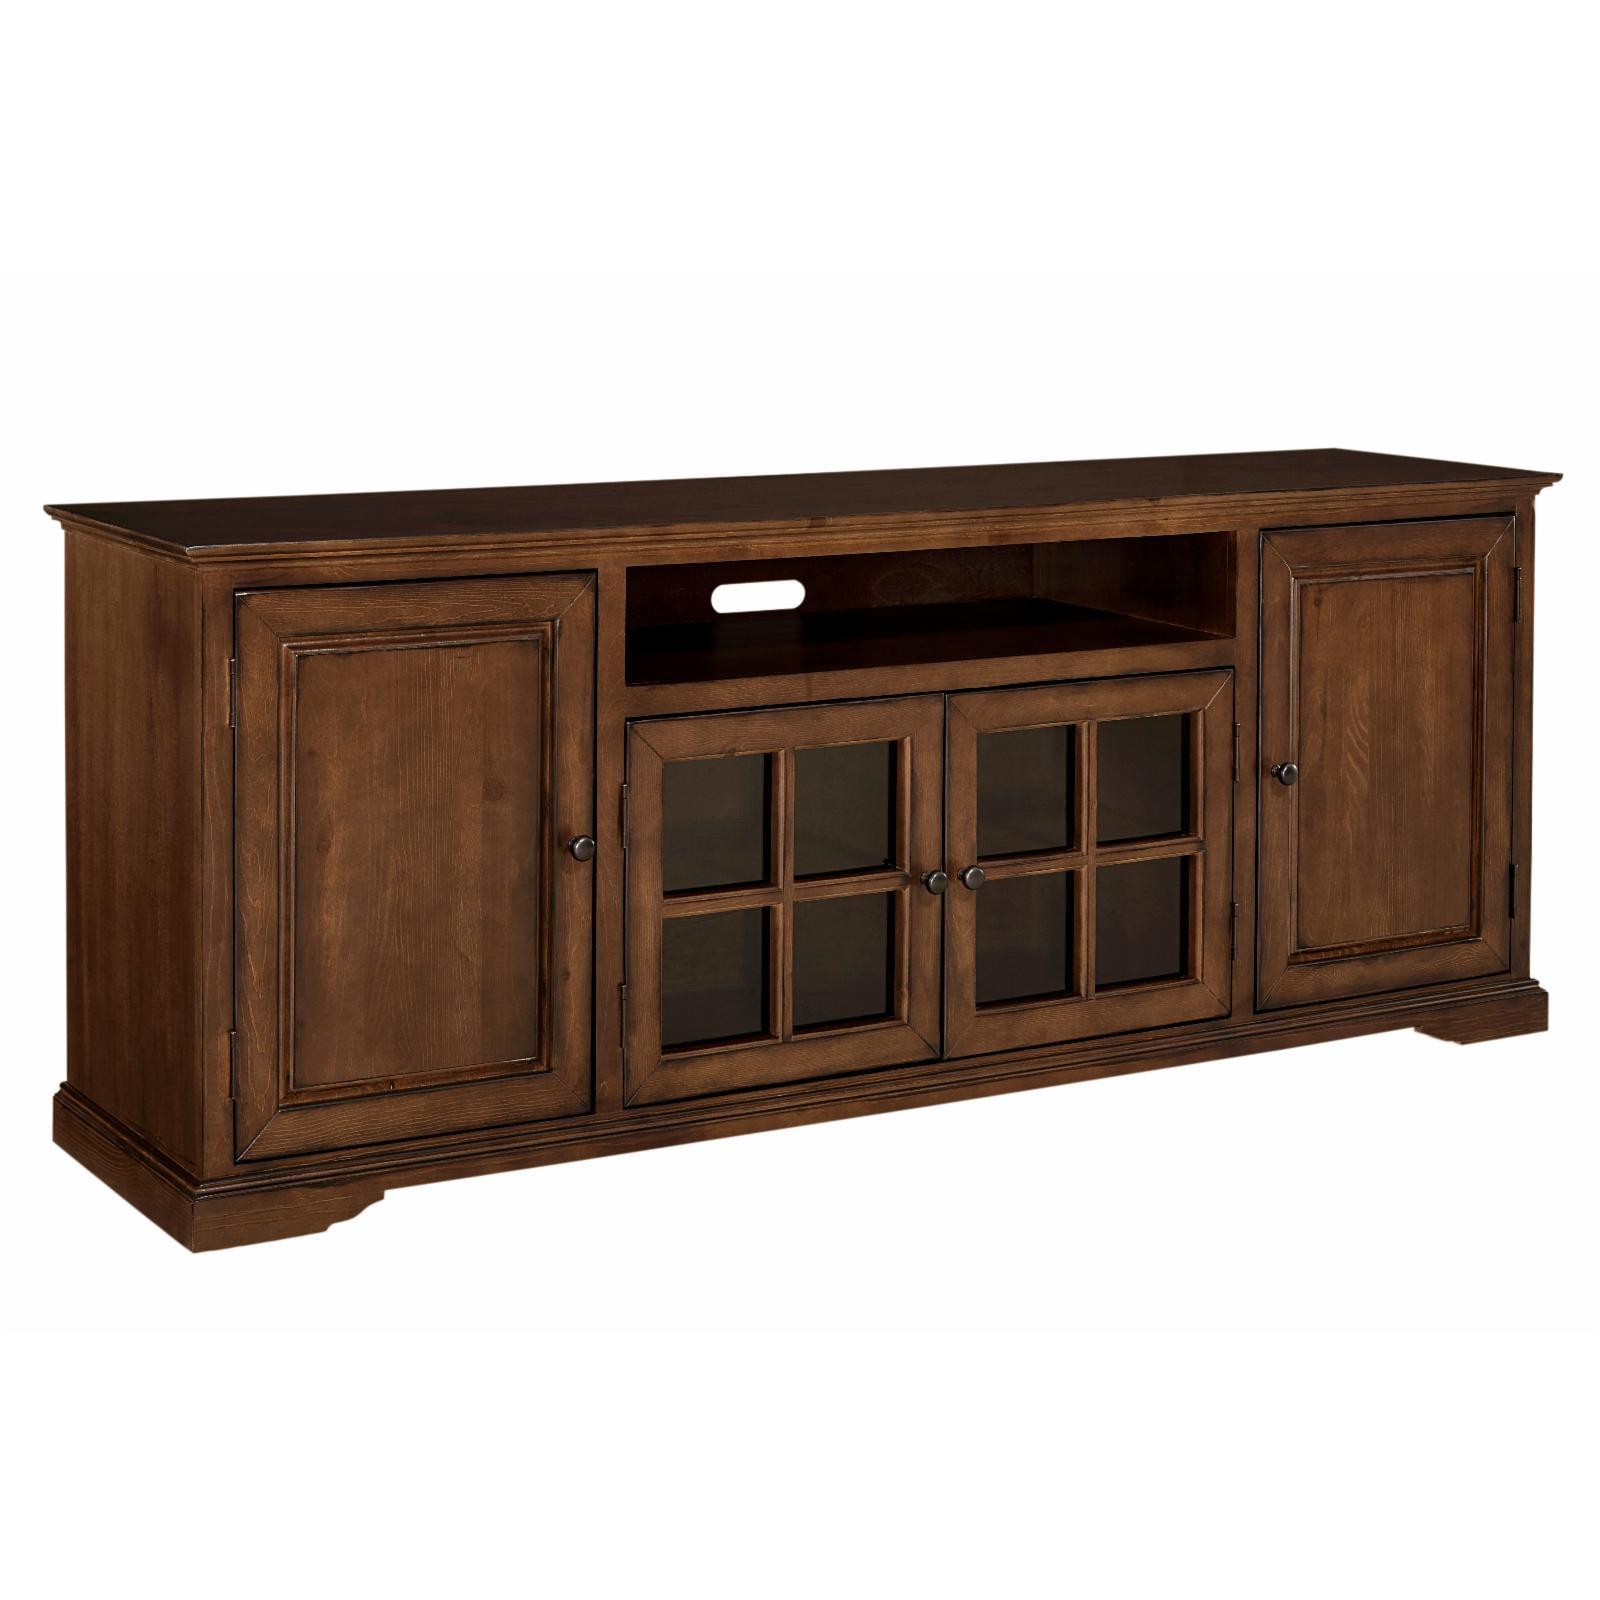 Auburn Cherry Traditional 82" TV Console with Cabinet